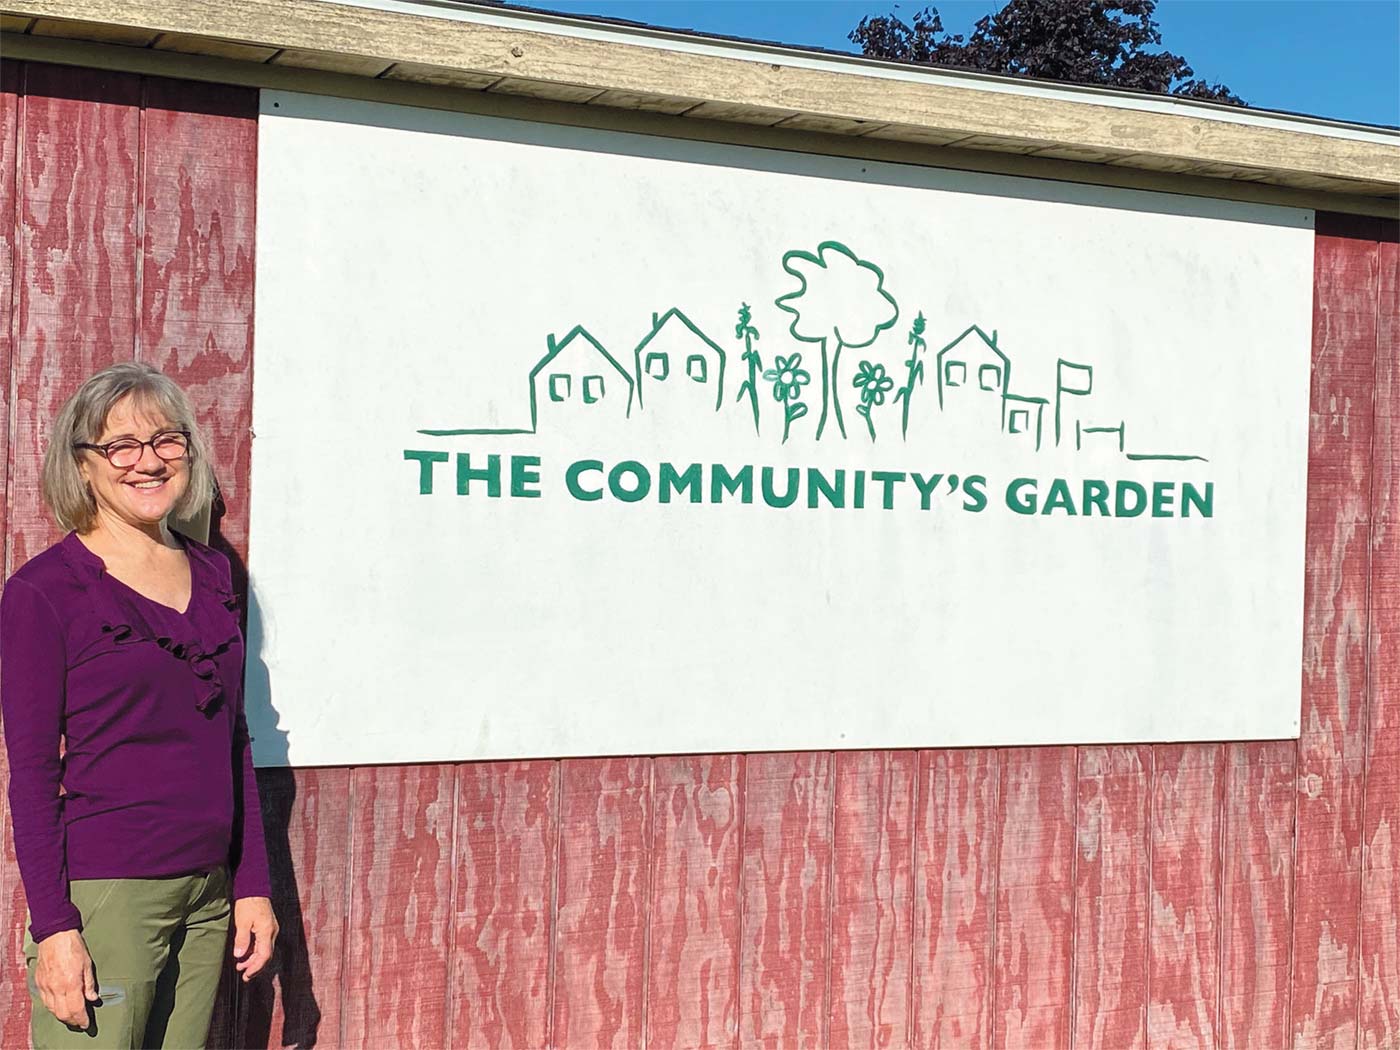 Carmen Schroeder’s passion in retirement, The Community’s Garden. Photo by Leslie Gast